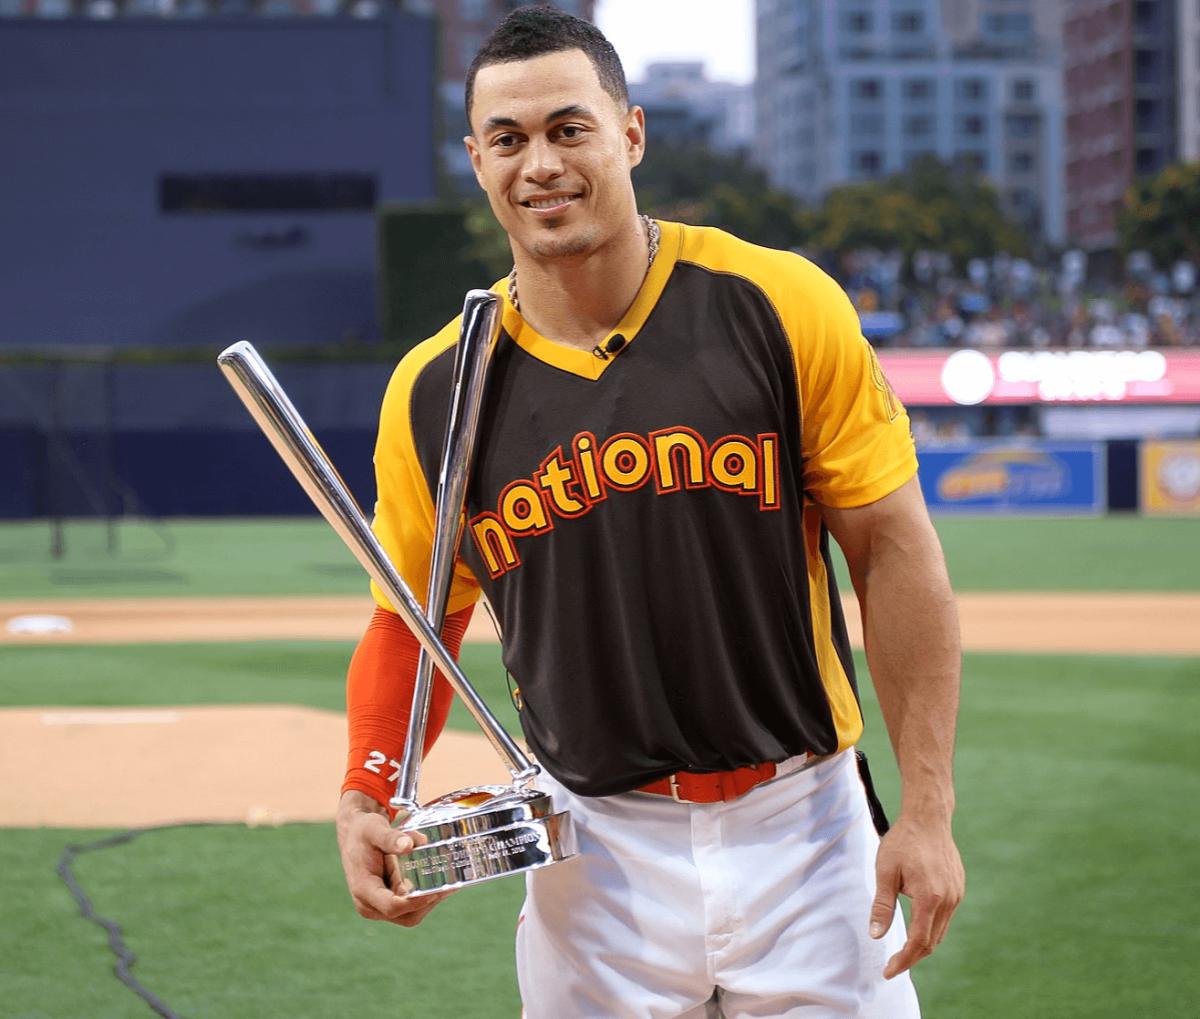 Giancarlo Stanton – Photo by Arturo Pardavila III from Hoboken, NJ, USA / CC BY (https://creativecommons.org/licenses/by/2.0)